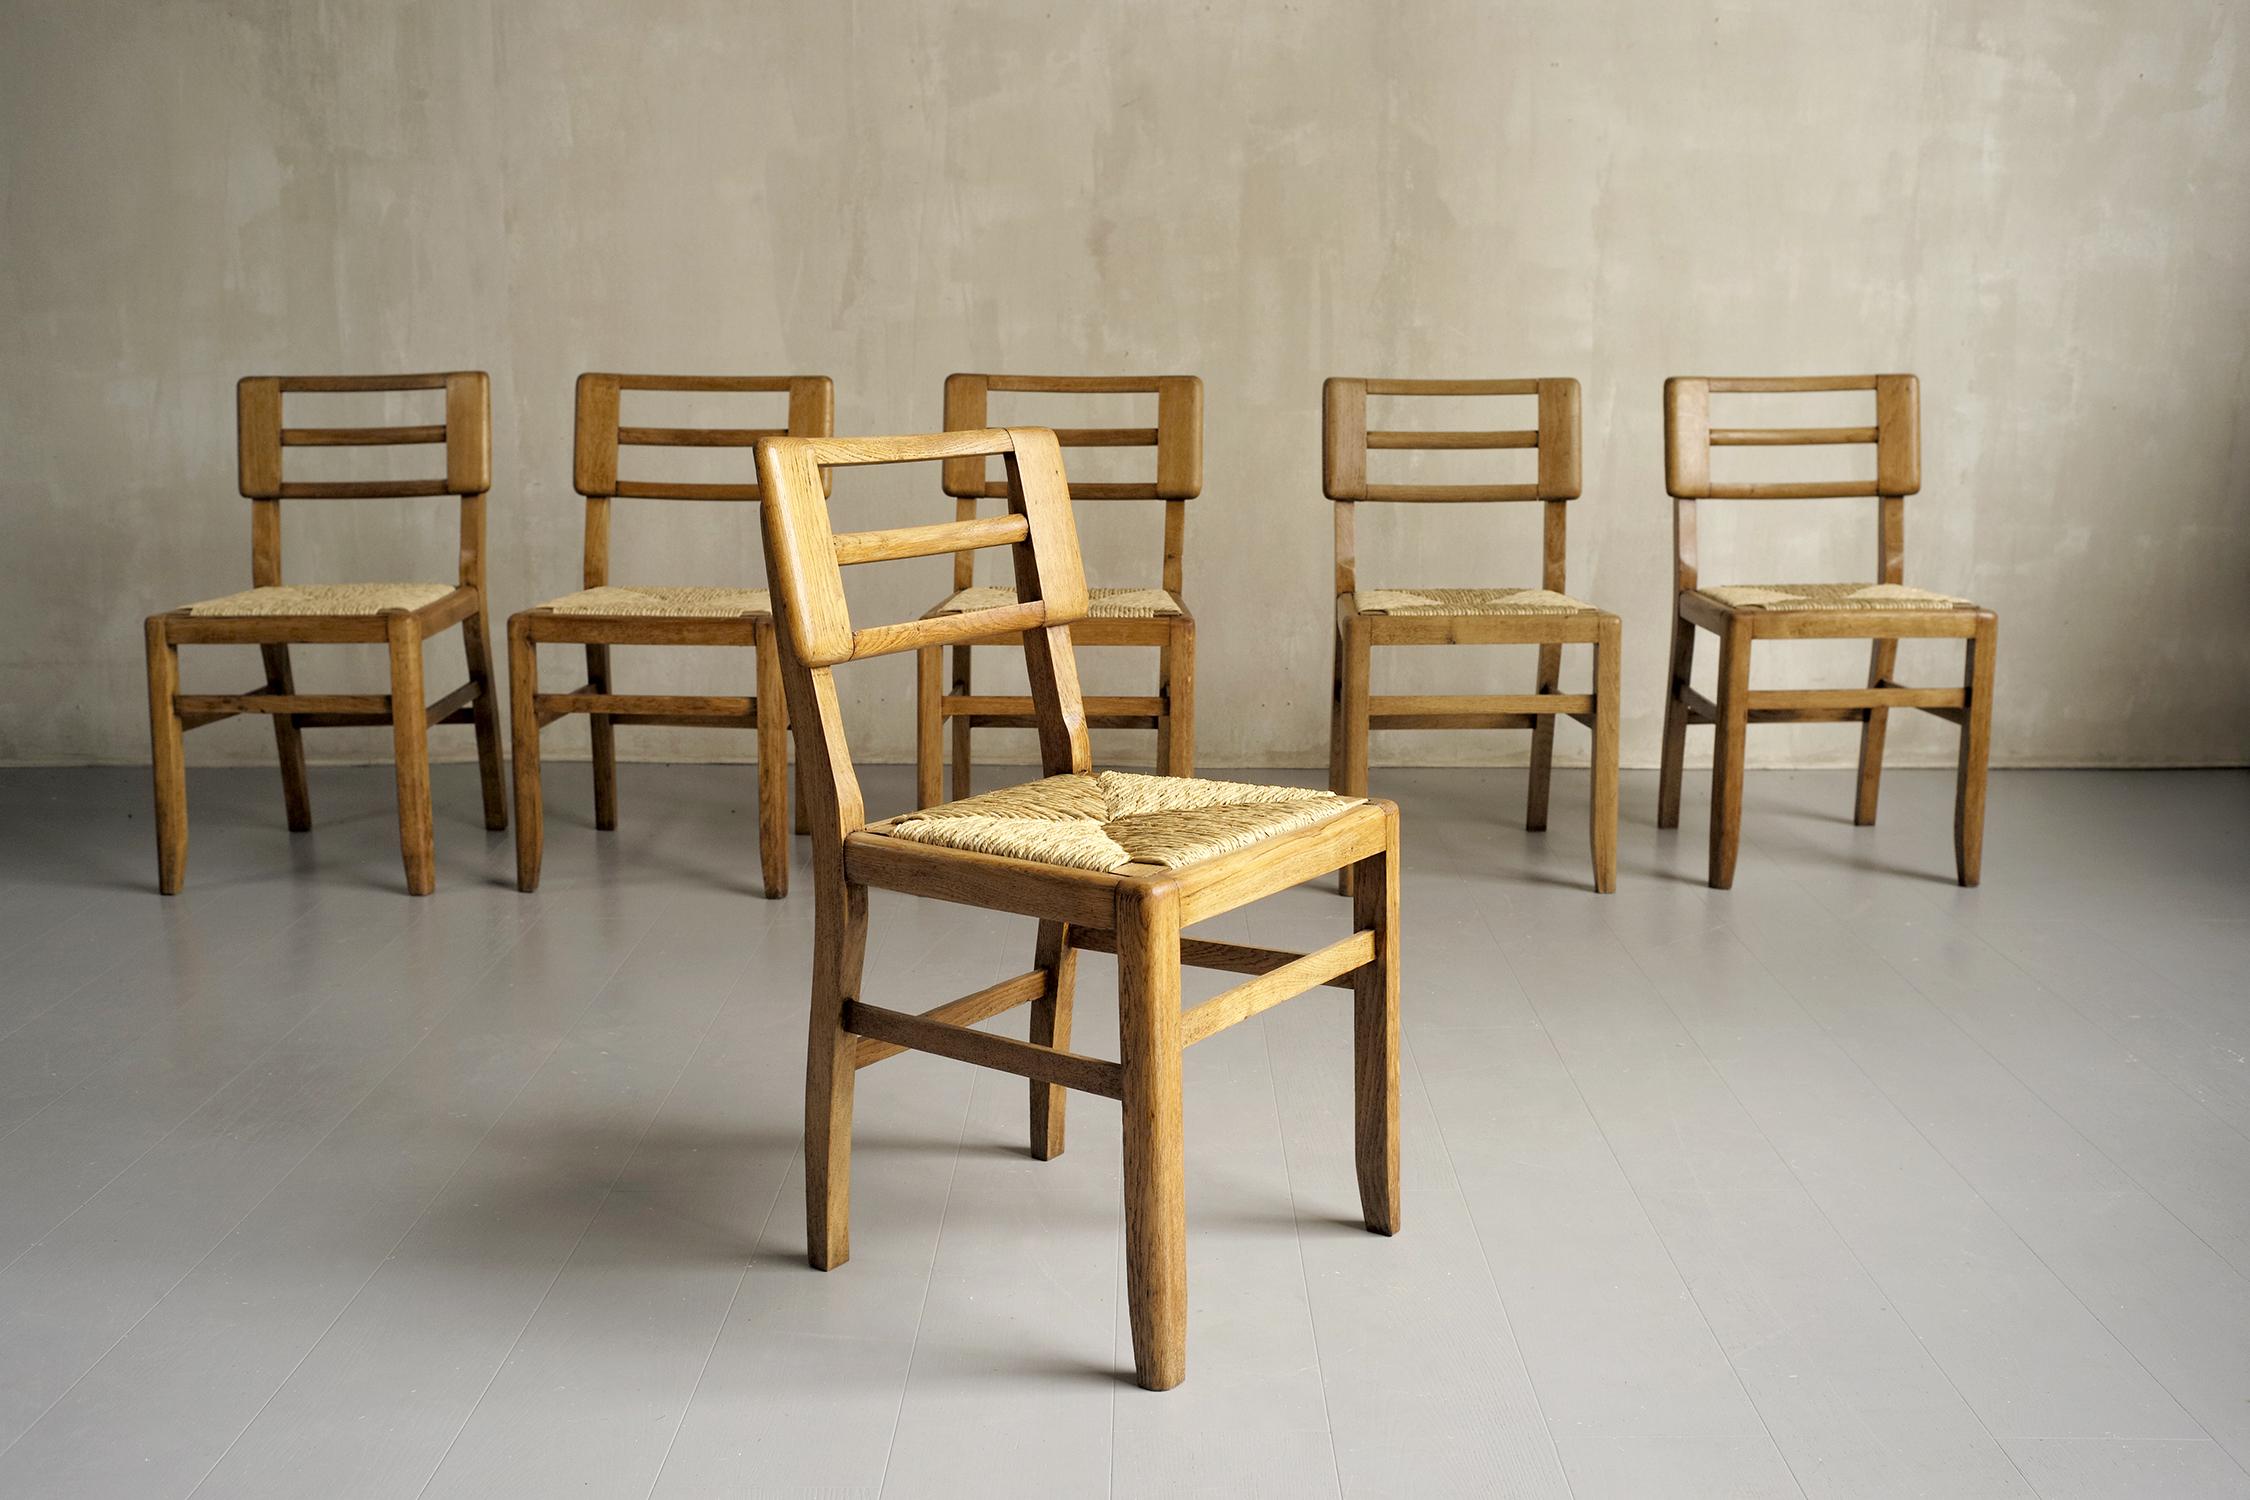 Pierre Cruège, Set of 6 Straw Chairs, France, 1950 For Sale 5